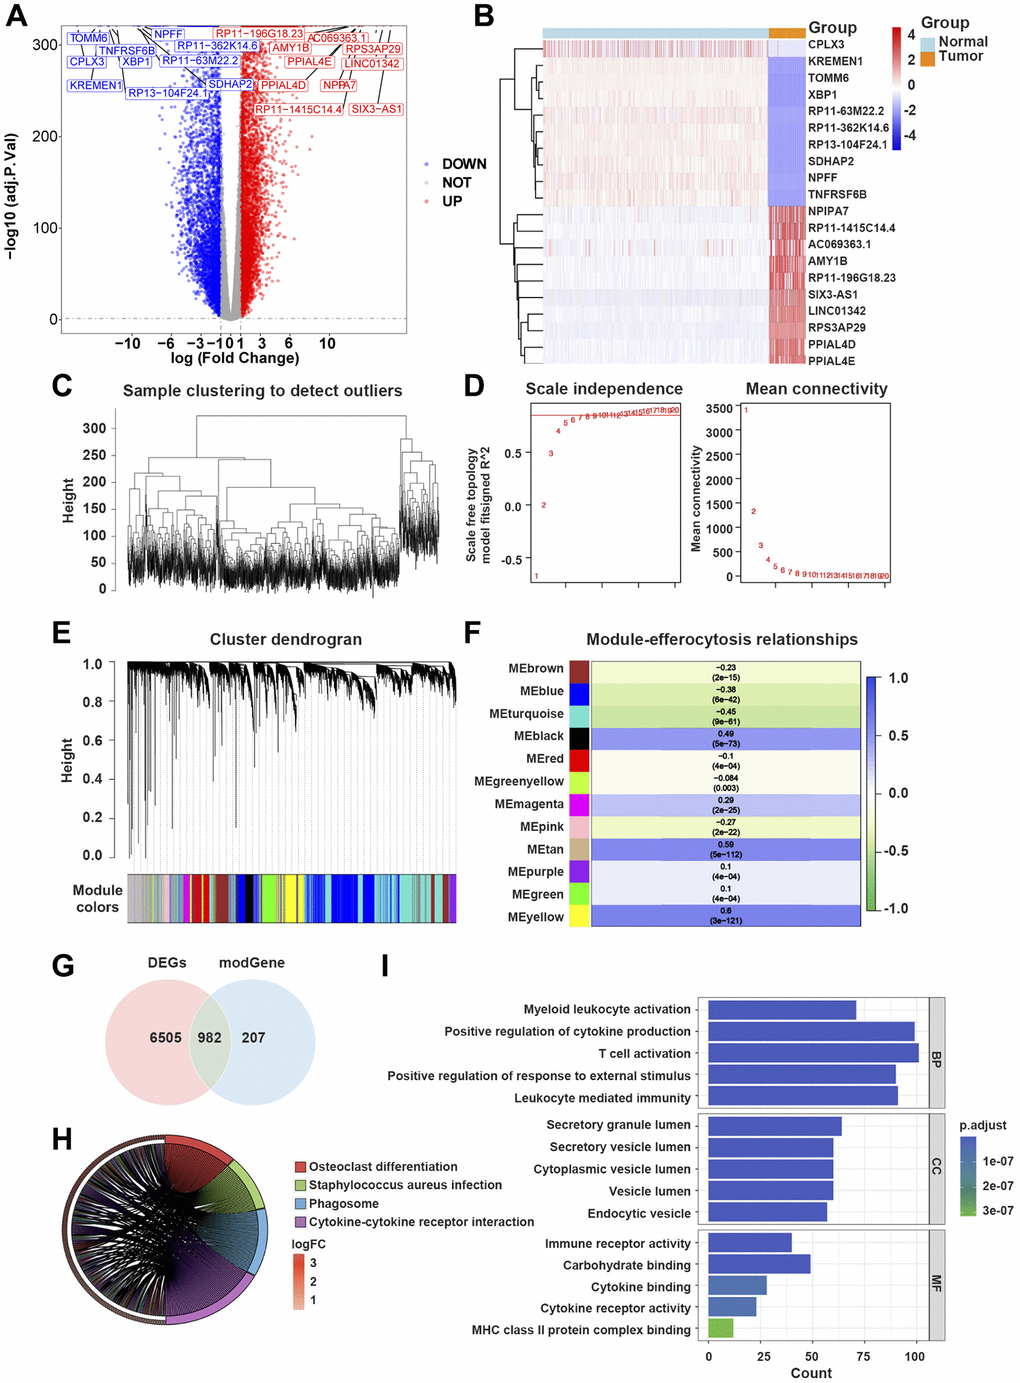 Efferocytosis-related differentially expressed genes (ERDEGs) were primarily involved in immune responses mediated by cytokines. (A) Volcano plot of DEGs in glioblastoma multiforme (GBM). (B) Heat map of top 10 upregulated and top 10 downregulated genes in GBM. (C) The Hclust function indicated that all samples in the training dataset were well clustered. (D) The soft-threshold power of 10 was selected to calculate adjacencies based on R2 > 0.85. (E) 12 modules were identified by dynamic tree cutting approach. (F) MEyellow and MEtan, which were mainly related to efferocytosis scores were selected, and 1,189 genes were considered as hub genes. (G) 982 ERDEGs were identified by crossing 1,189 hub gens with 7,487 DEGs found between GBM and normal samples. (H) Kyoto Encyclopedia of Genes and Genomes (KEGG) pathway analysis of ERDEGs. (I) Gene Ontology (GO) enrichment analysis of ERDEGs.